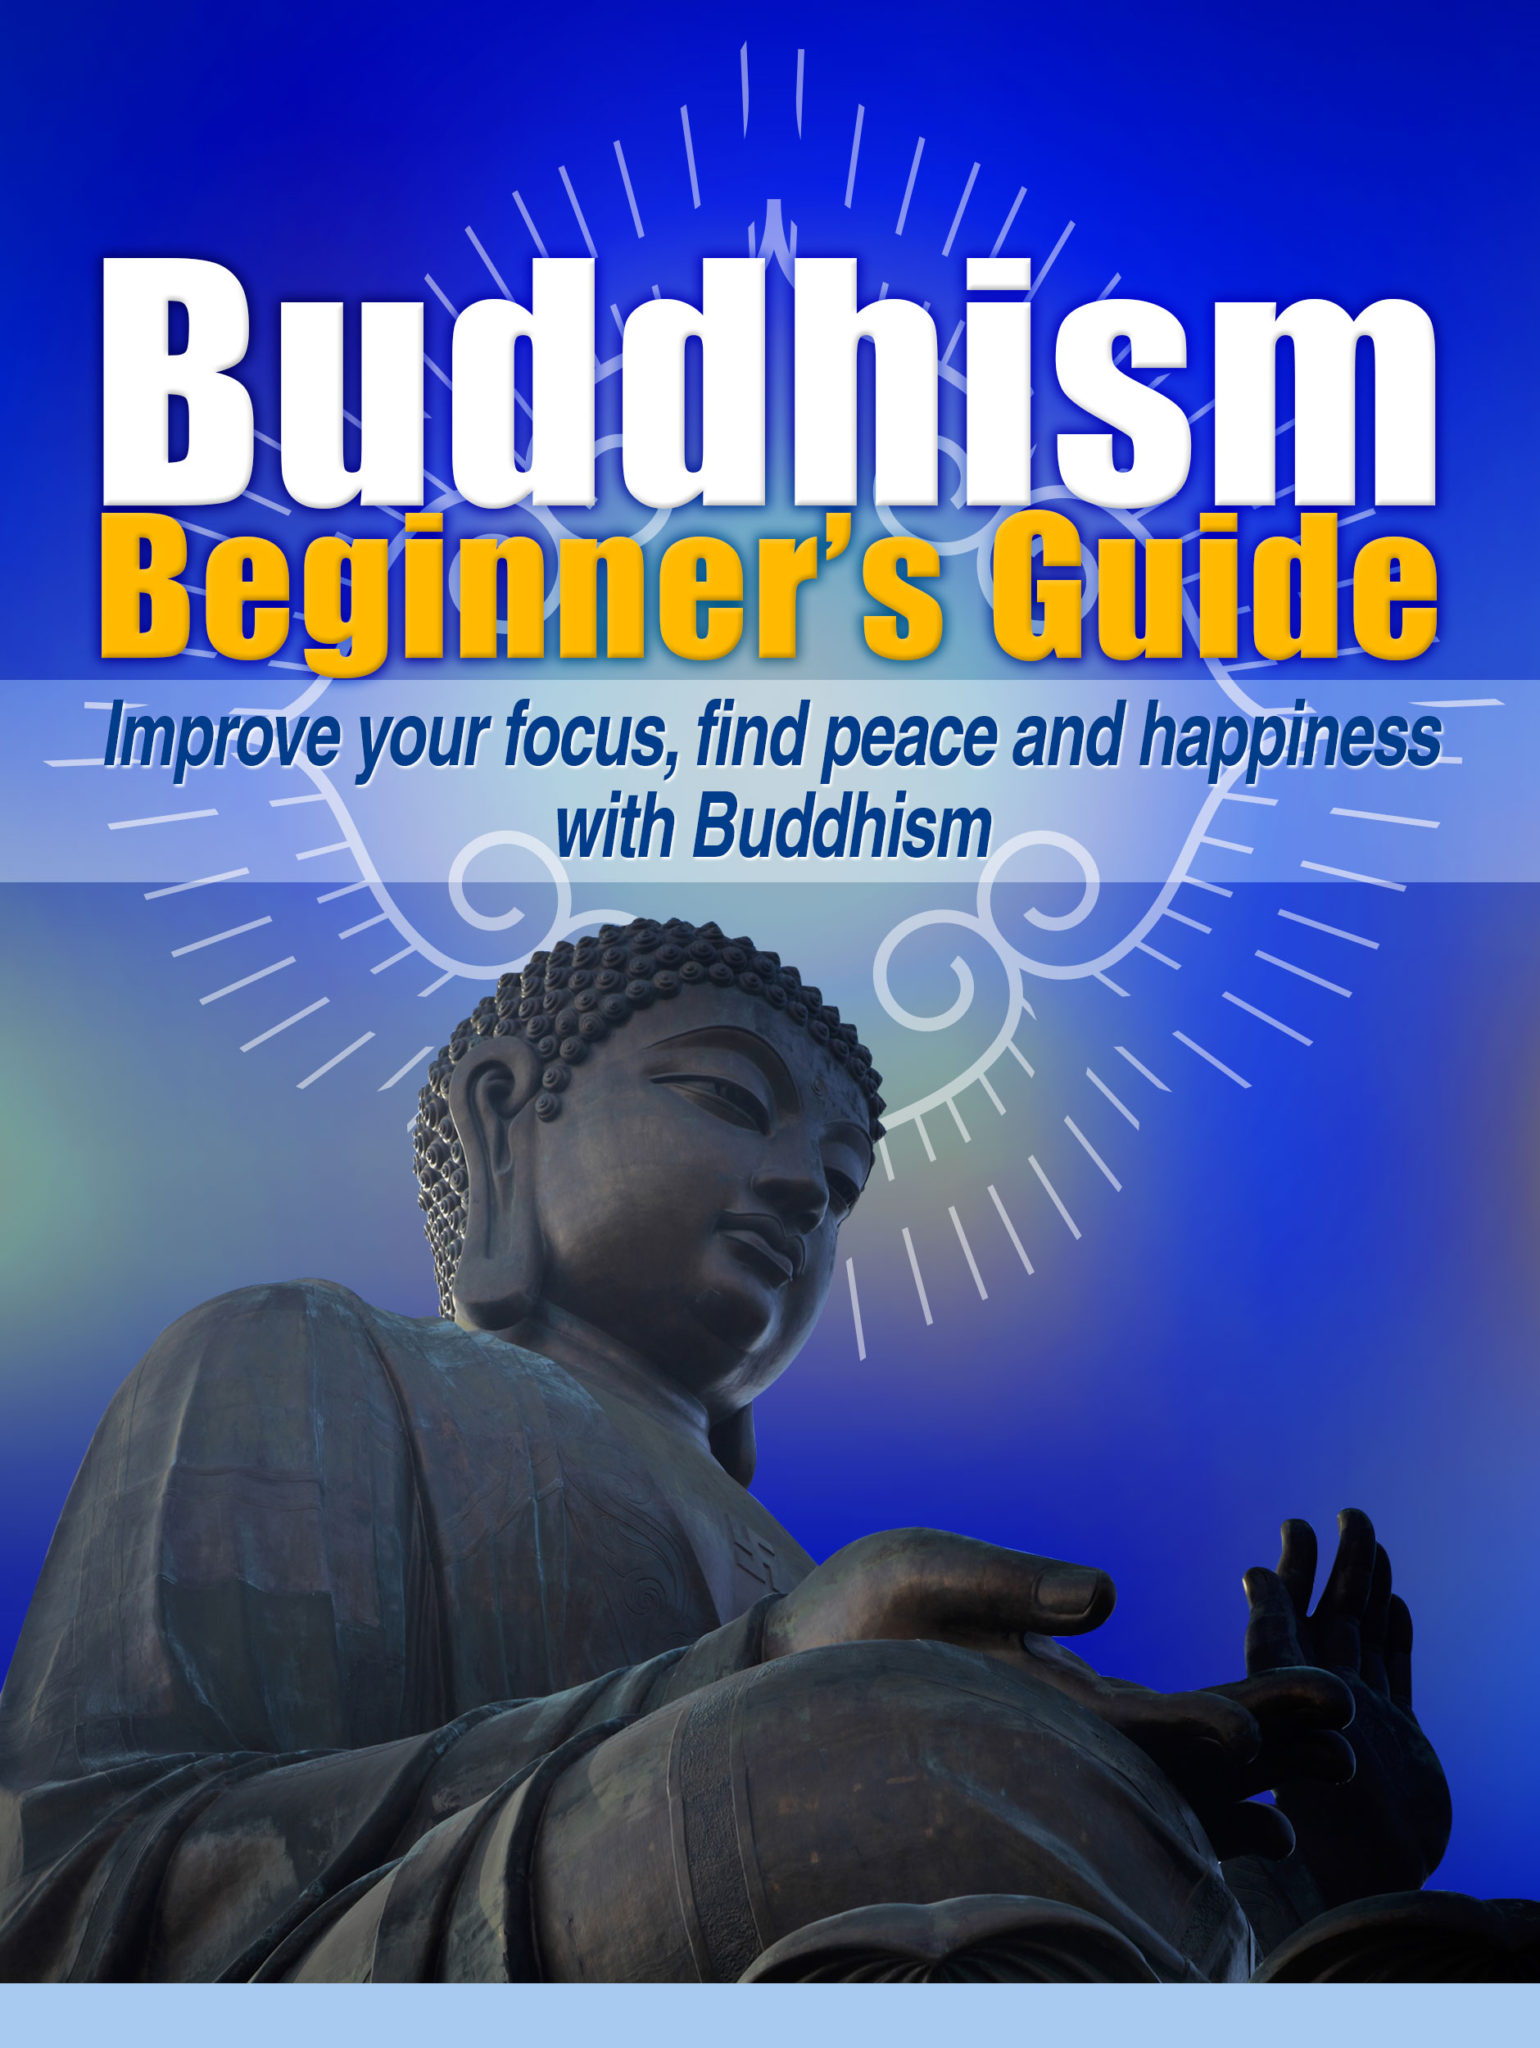 Buddhism Beginners Guide by Bob Smith